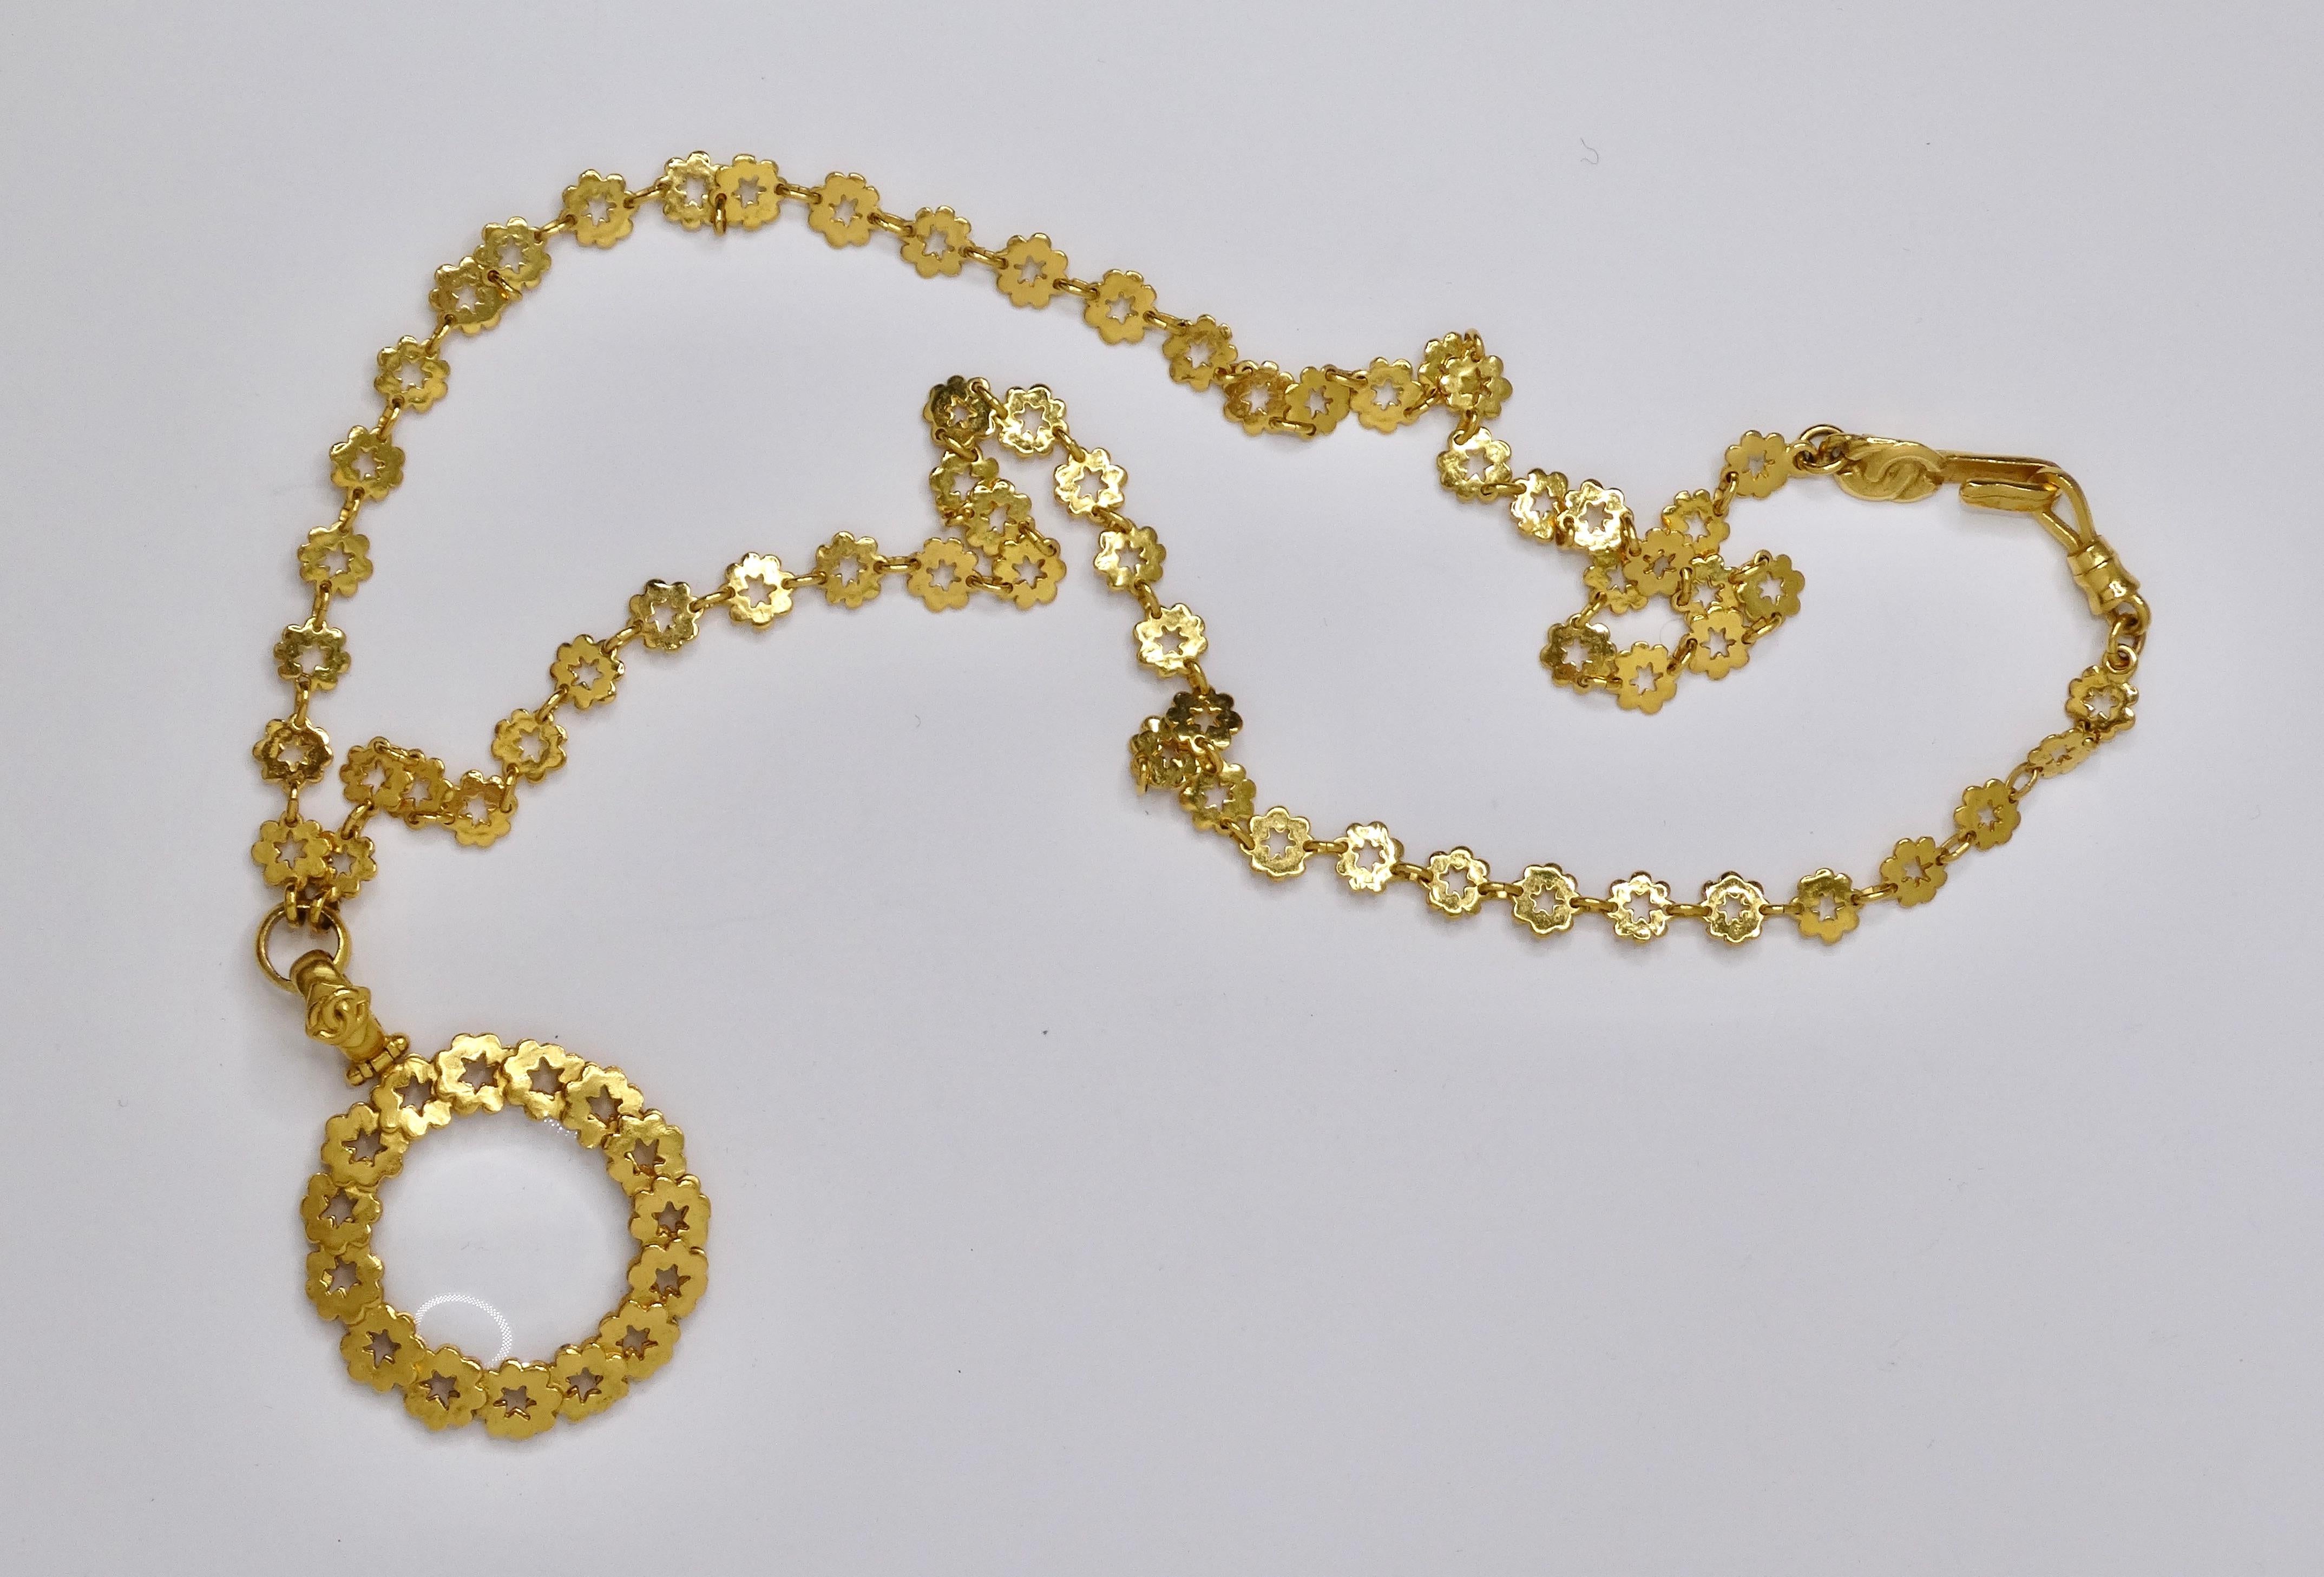 This is a unique and rare piece of Chanel. A beautiful piece to add to any Chanel collector! This features a long chain (21.5 inches) that is made up of delicate and adorable gold flowers linked together. The whole piece is featured in plated 24k